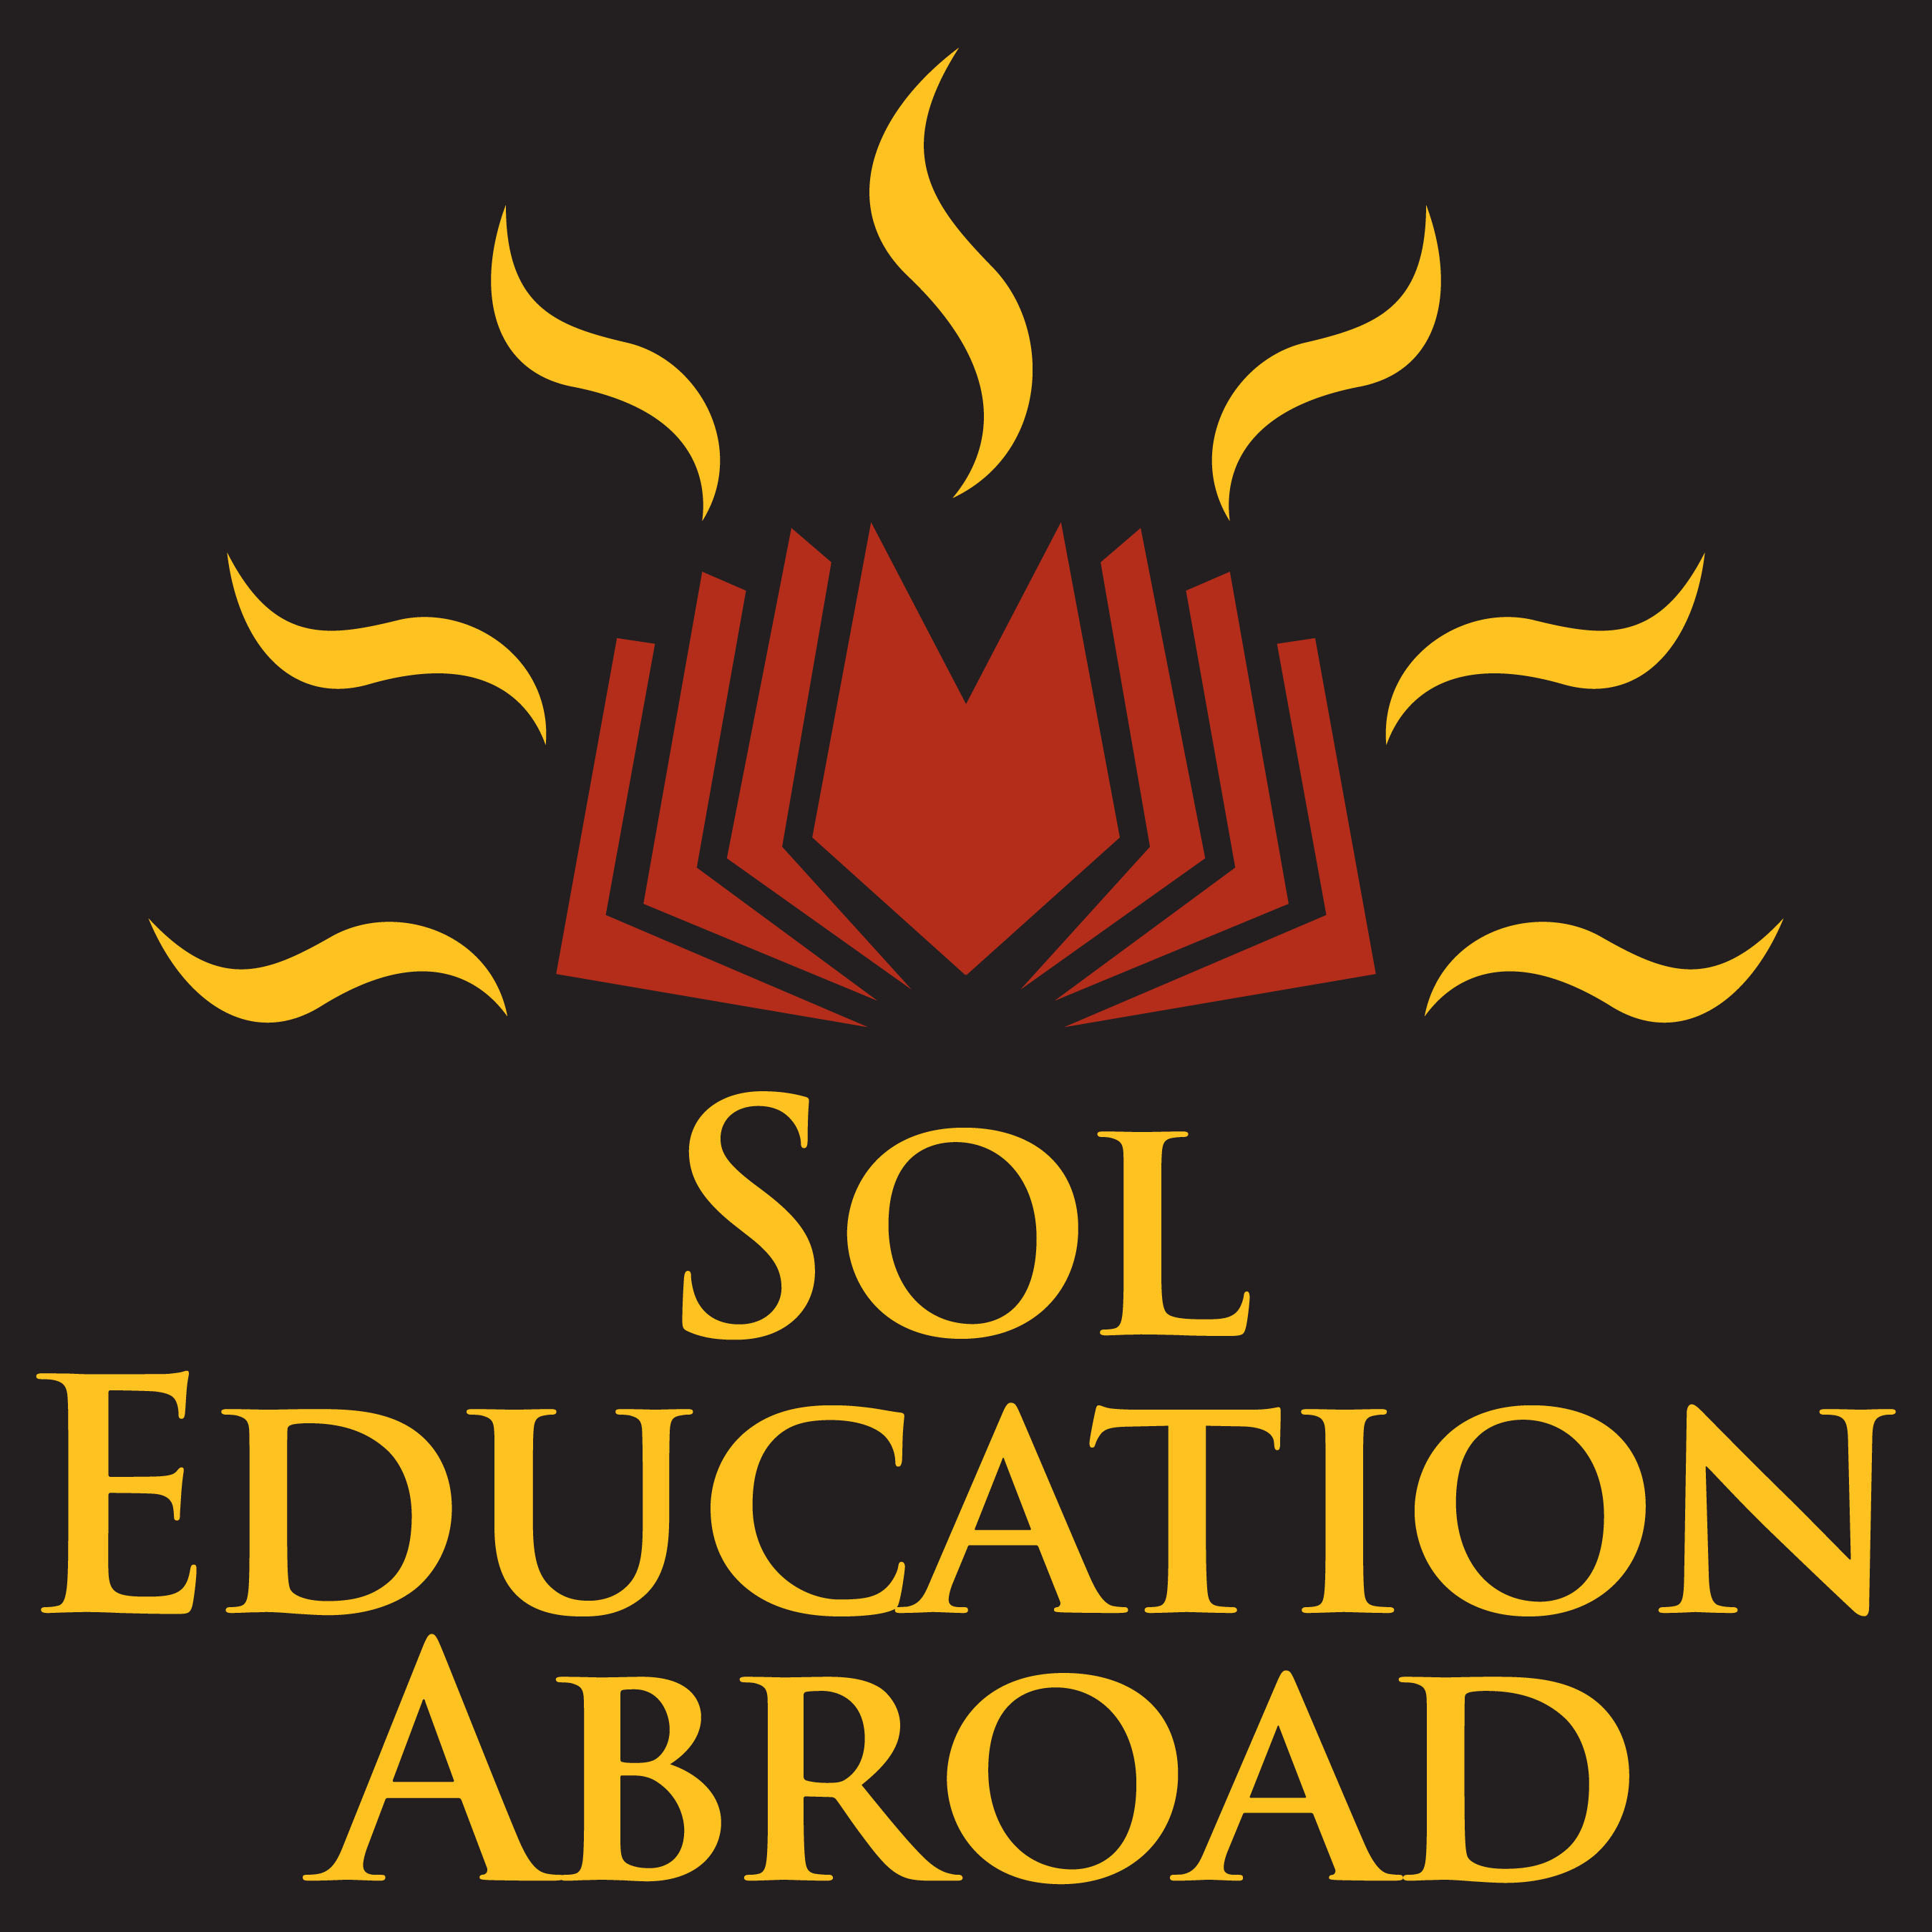 Sol Education Abroad - University Study Abroad & Spanish Immersion Programs